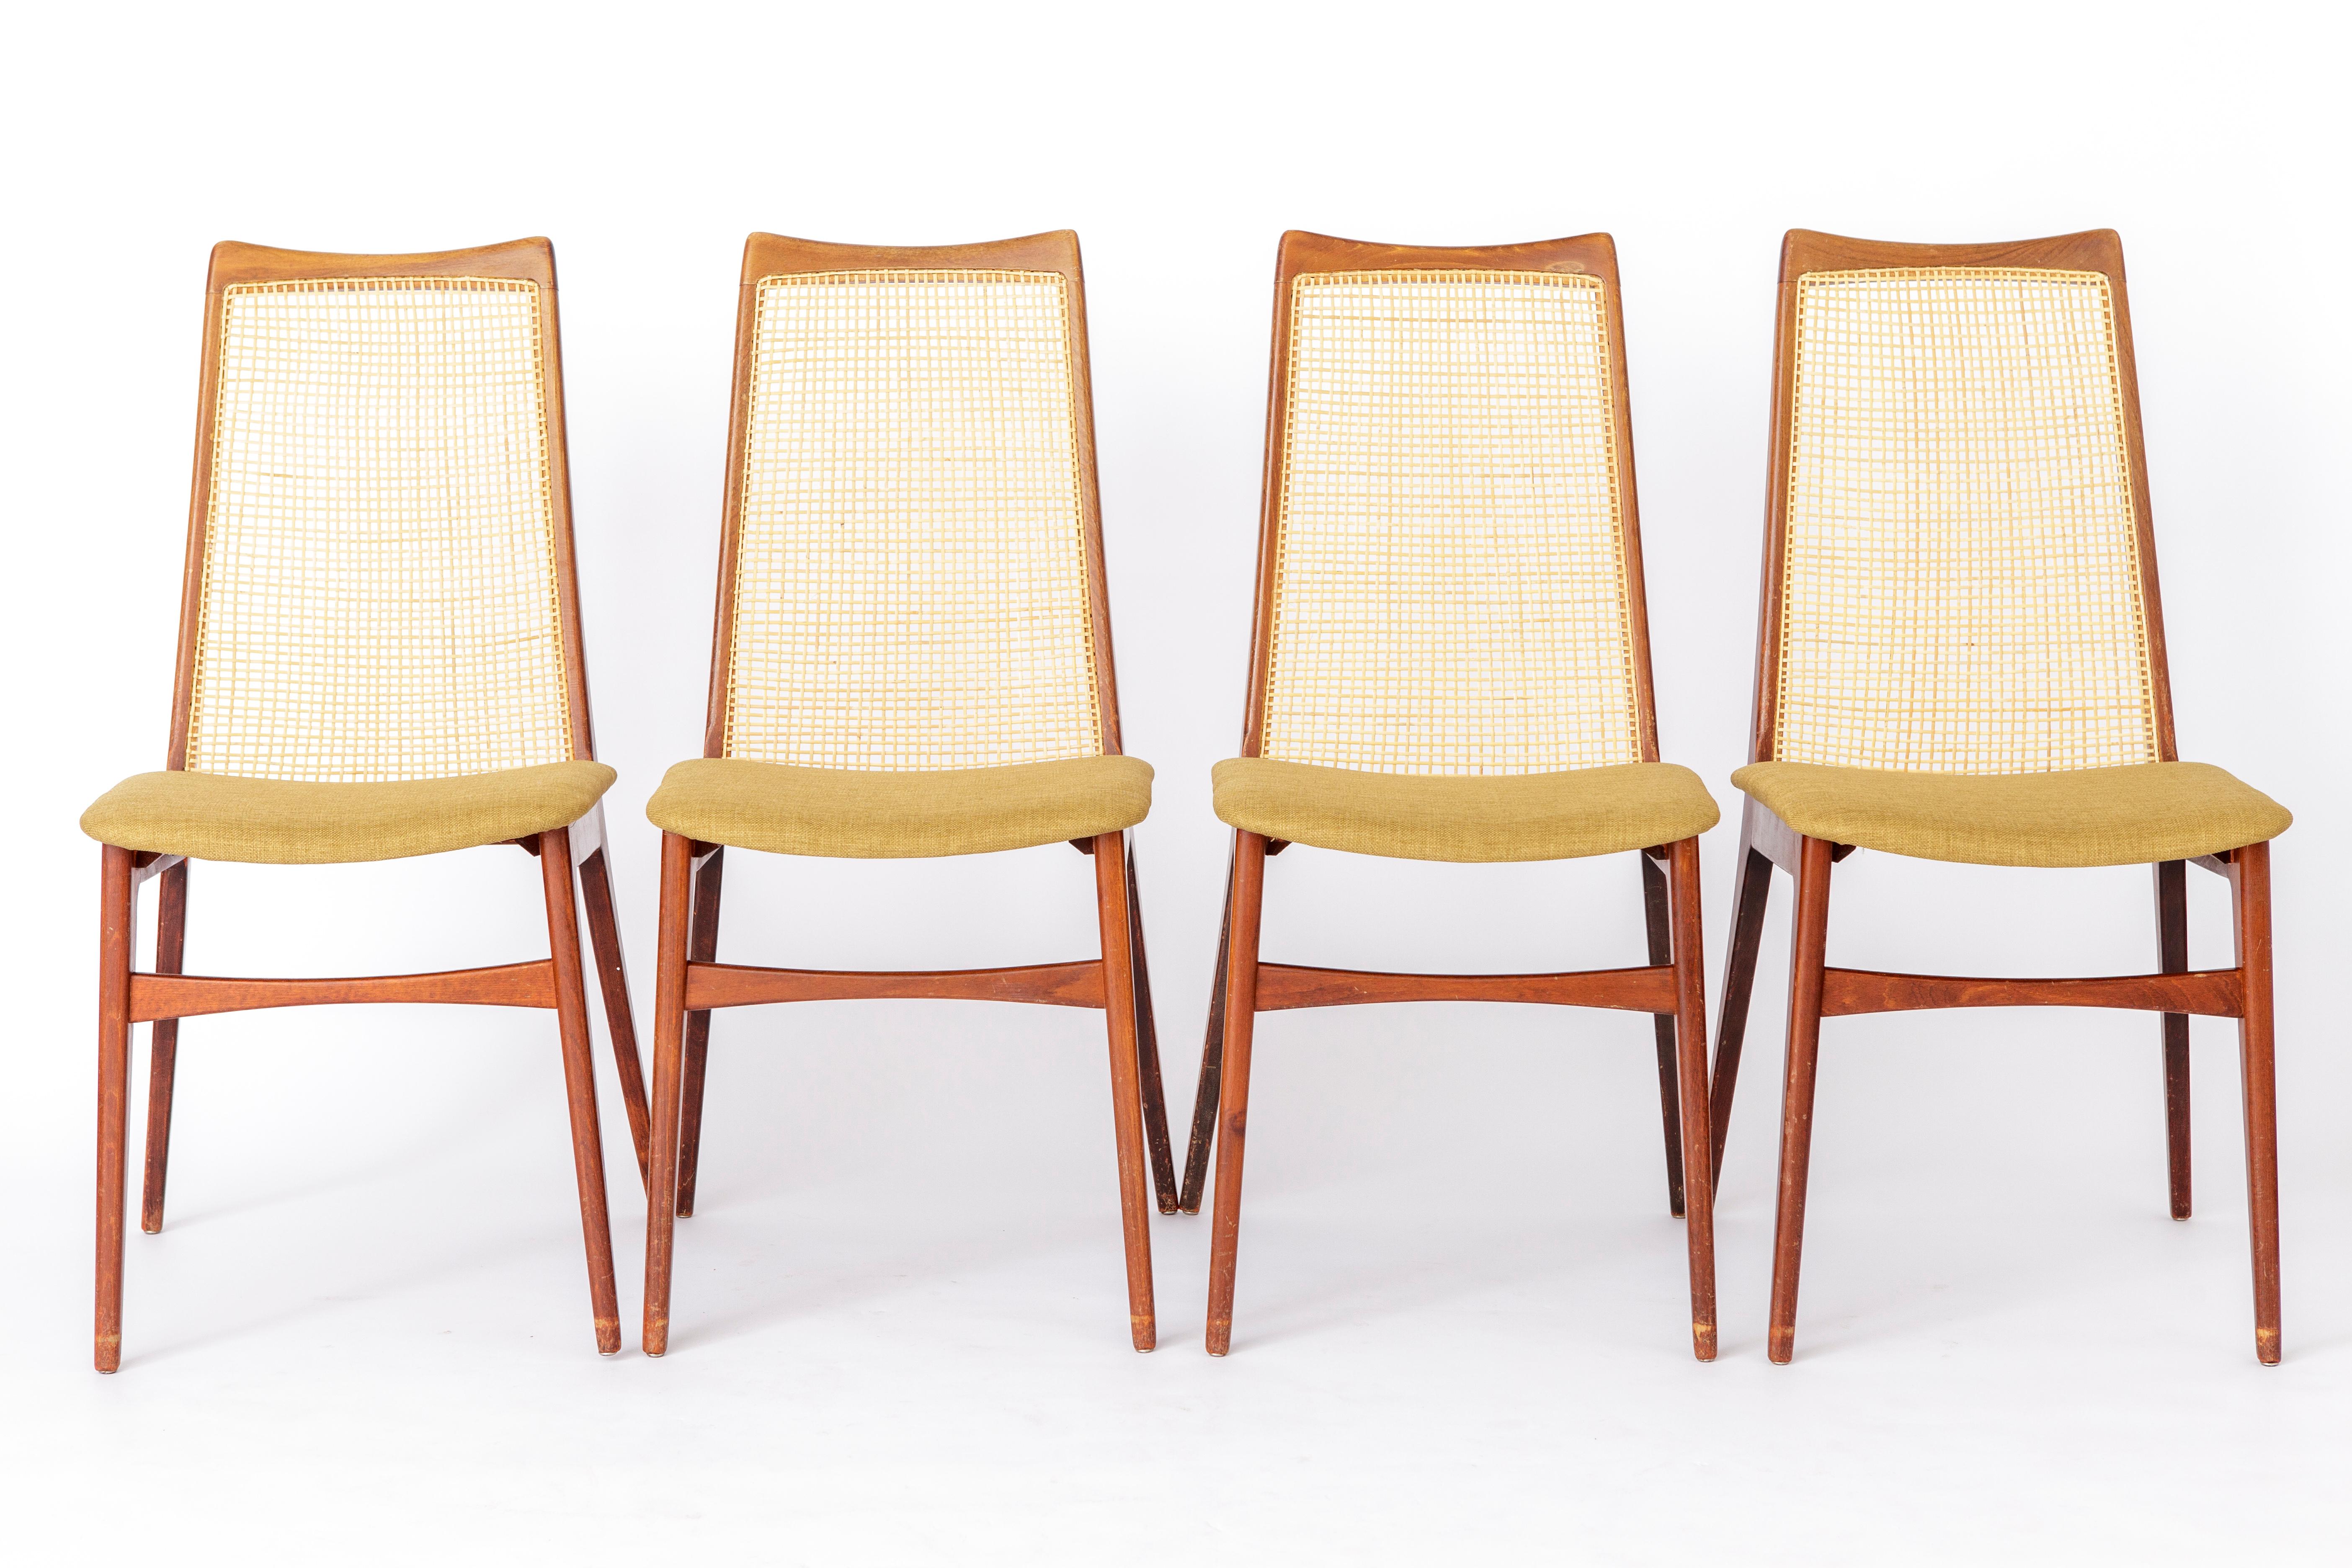 4 Vintage Chairs from the 1960s. 
Manufacturer: Wilhelm Benze GmbH, Germany
Displayed price is for a set of 4. 

Good vintage condition. 
Dark dyed beech wood. Sturdy with stable stand. 
Seats reupholstered with textile in sort of mustard color.